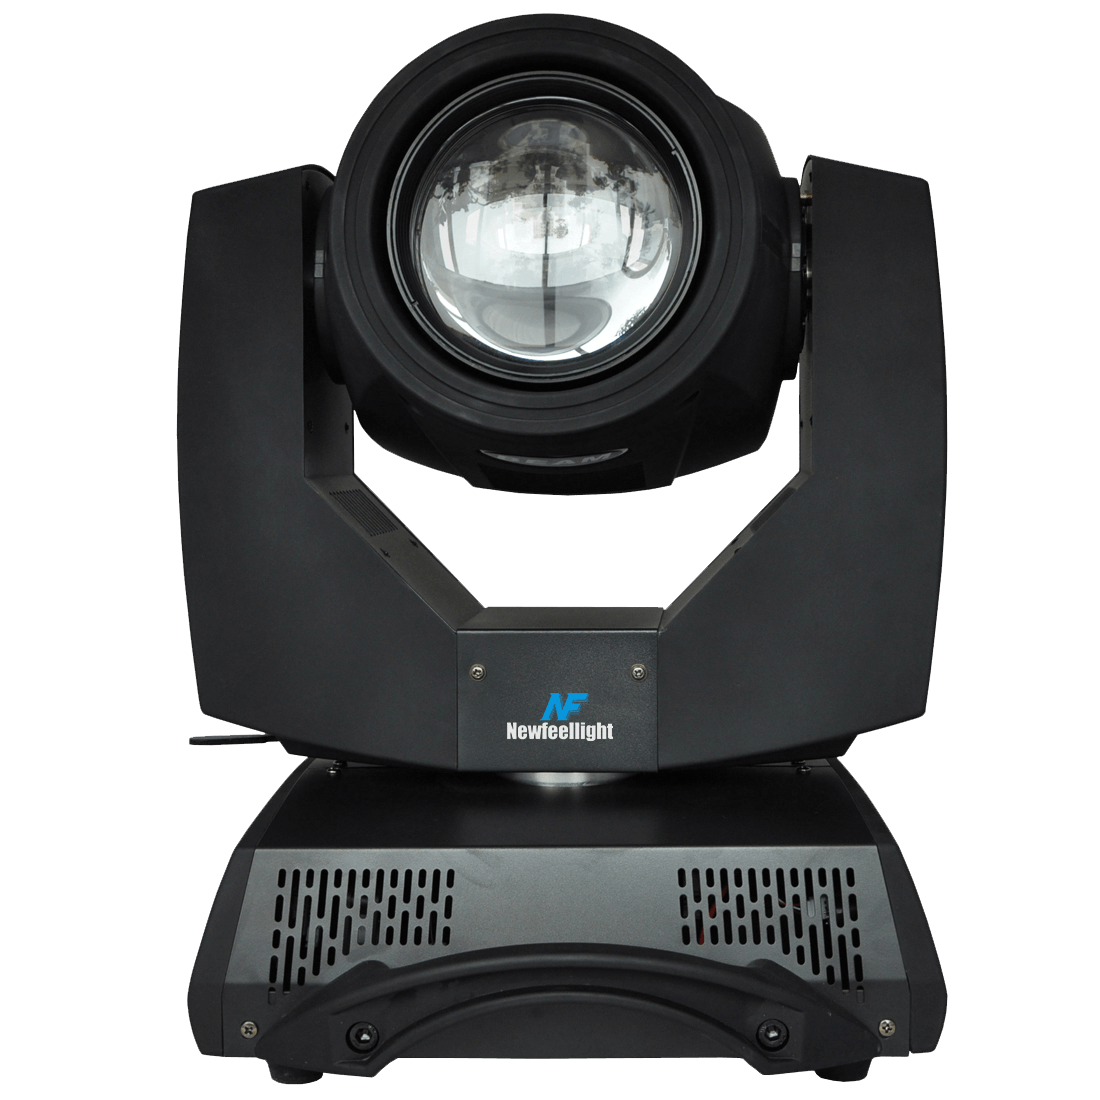 MB230 230w 7R Moving Head Stage Lights